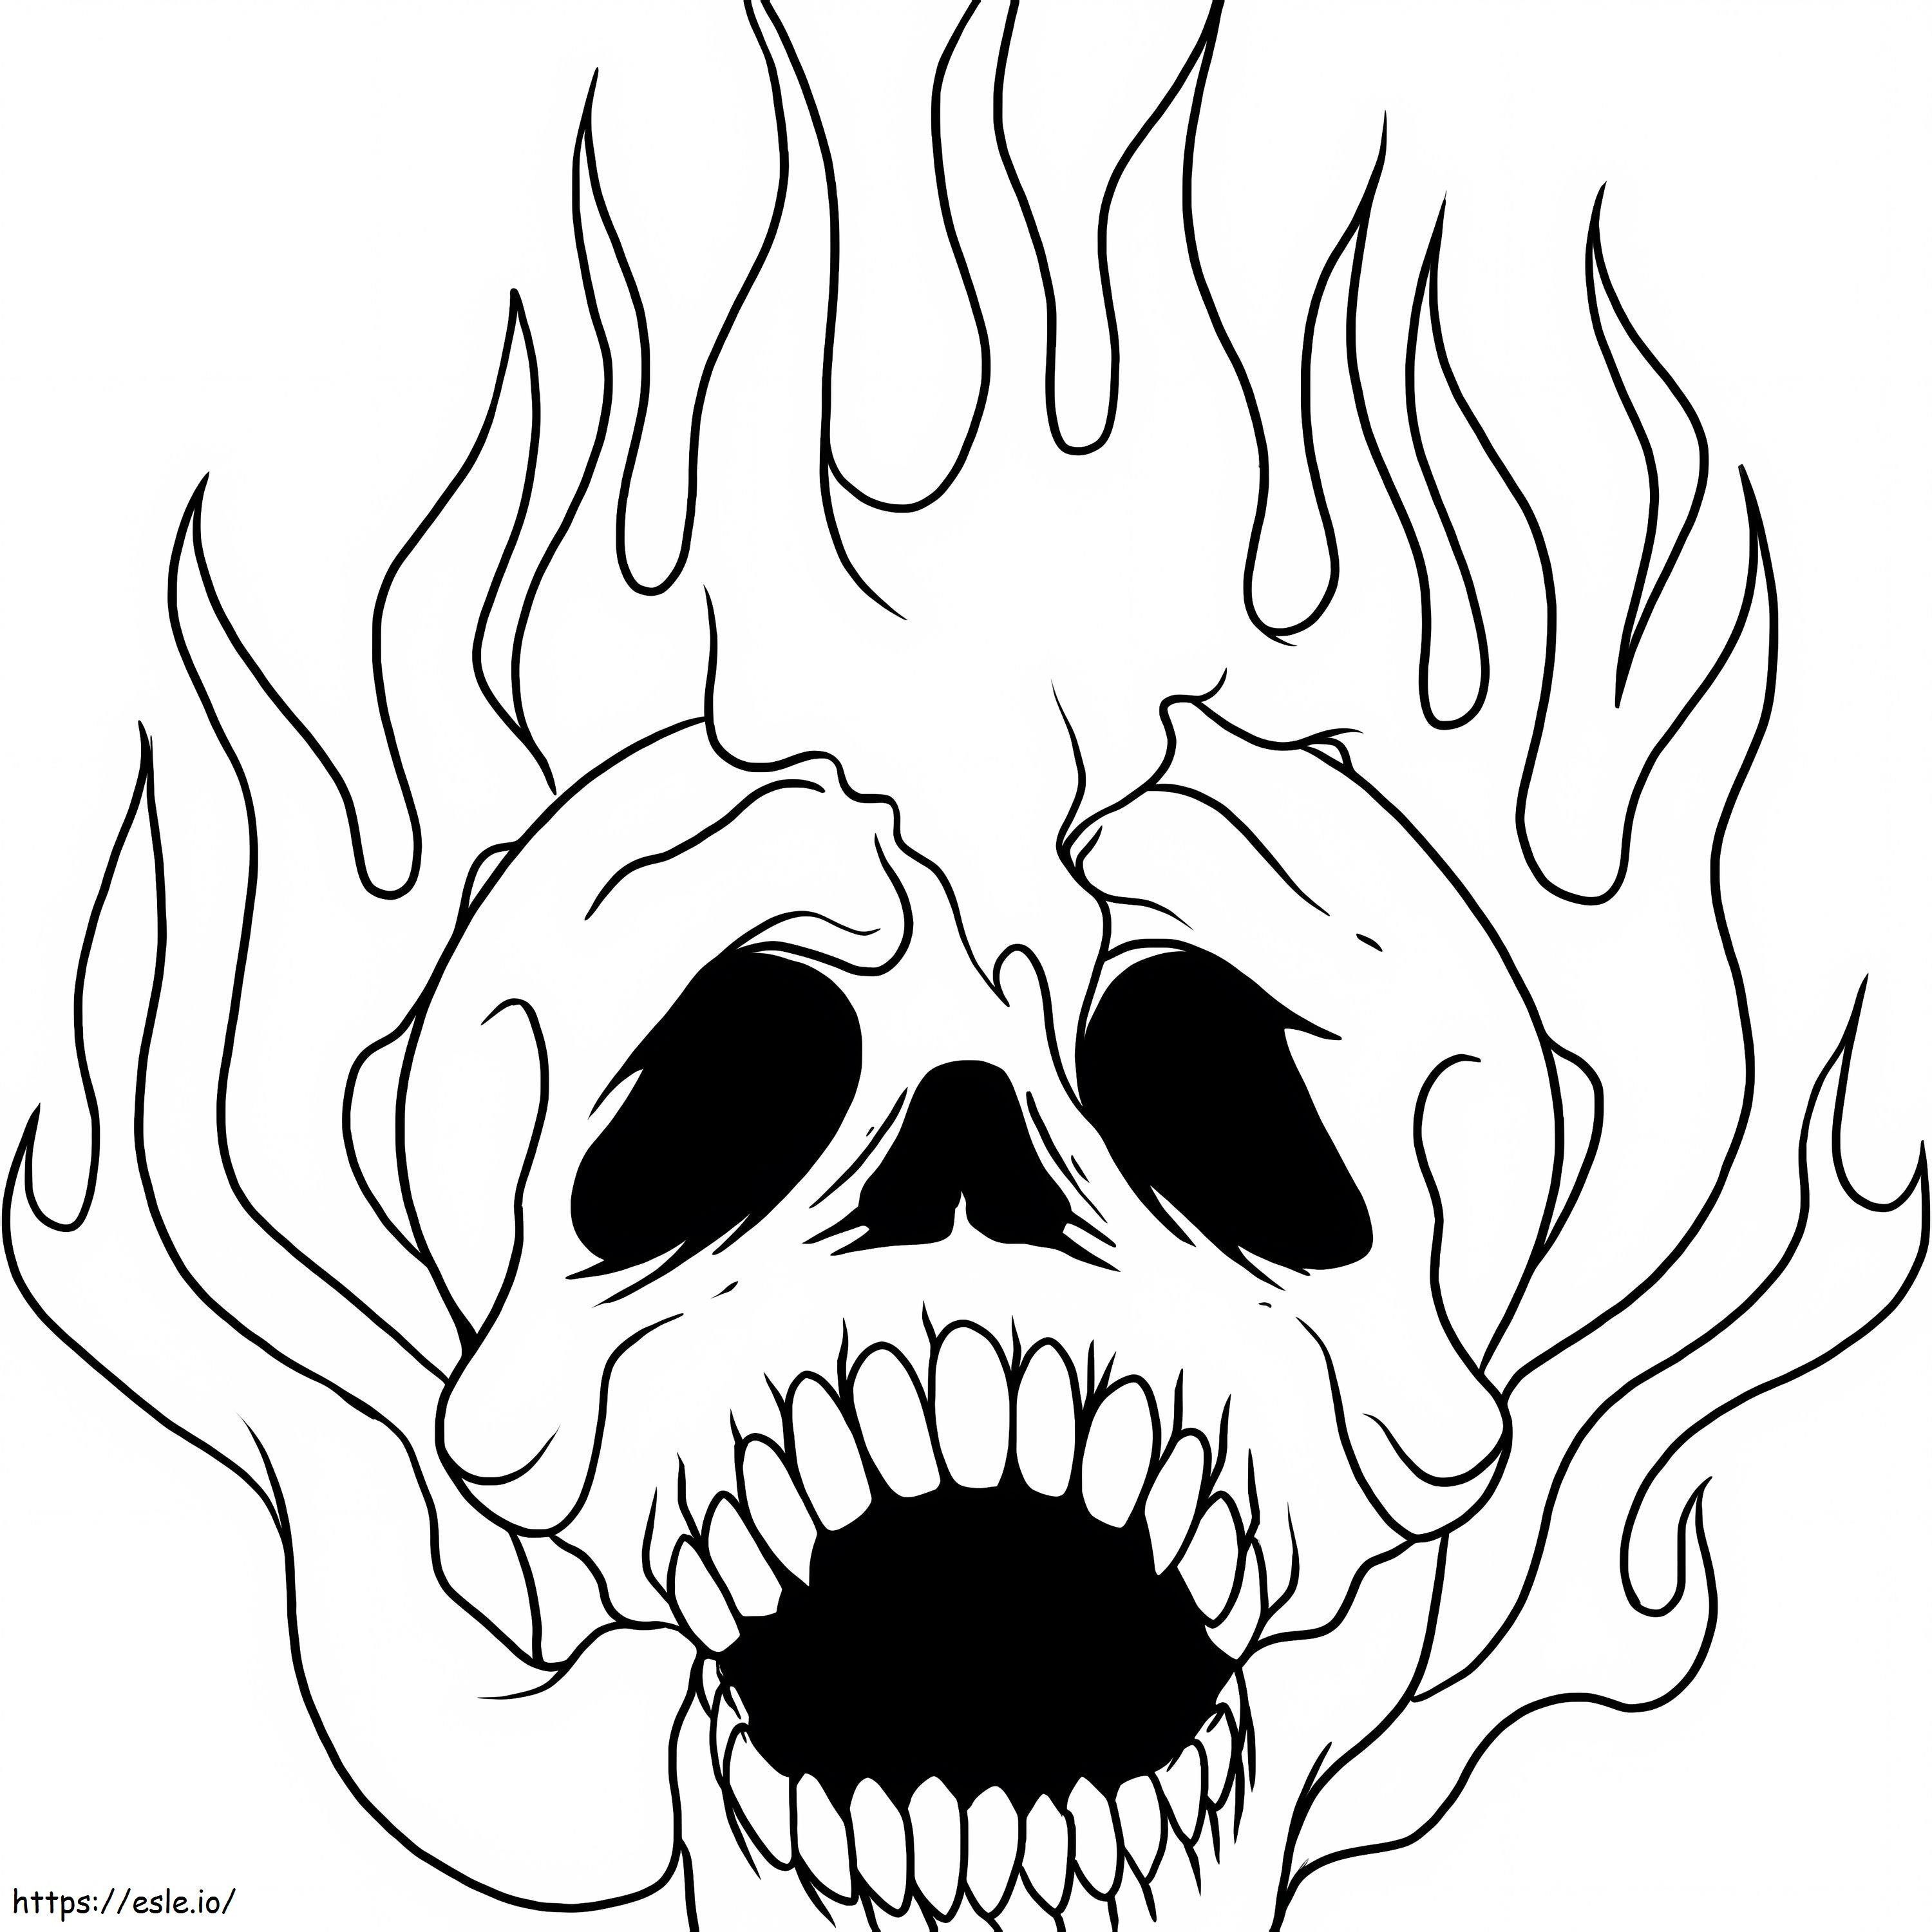 Skull In The Heart coloring page